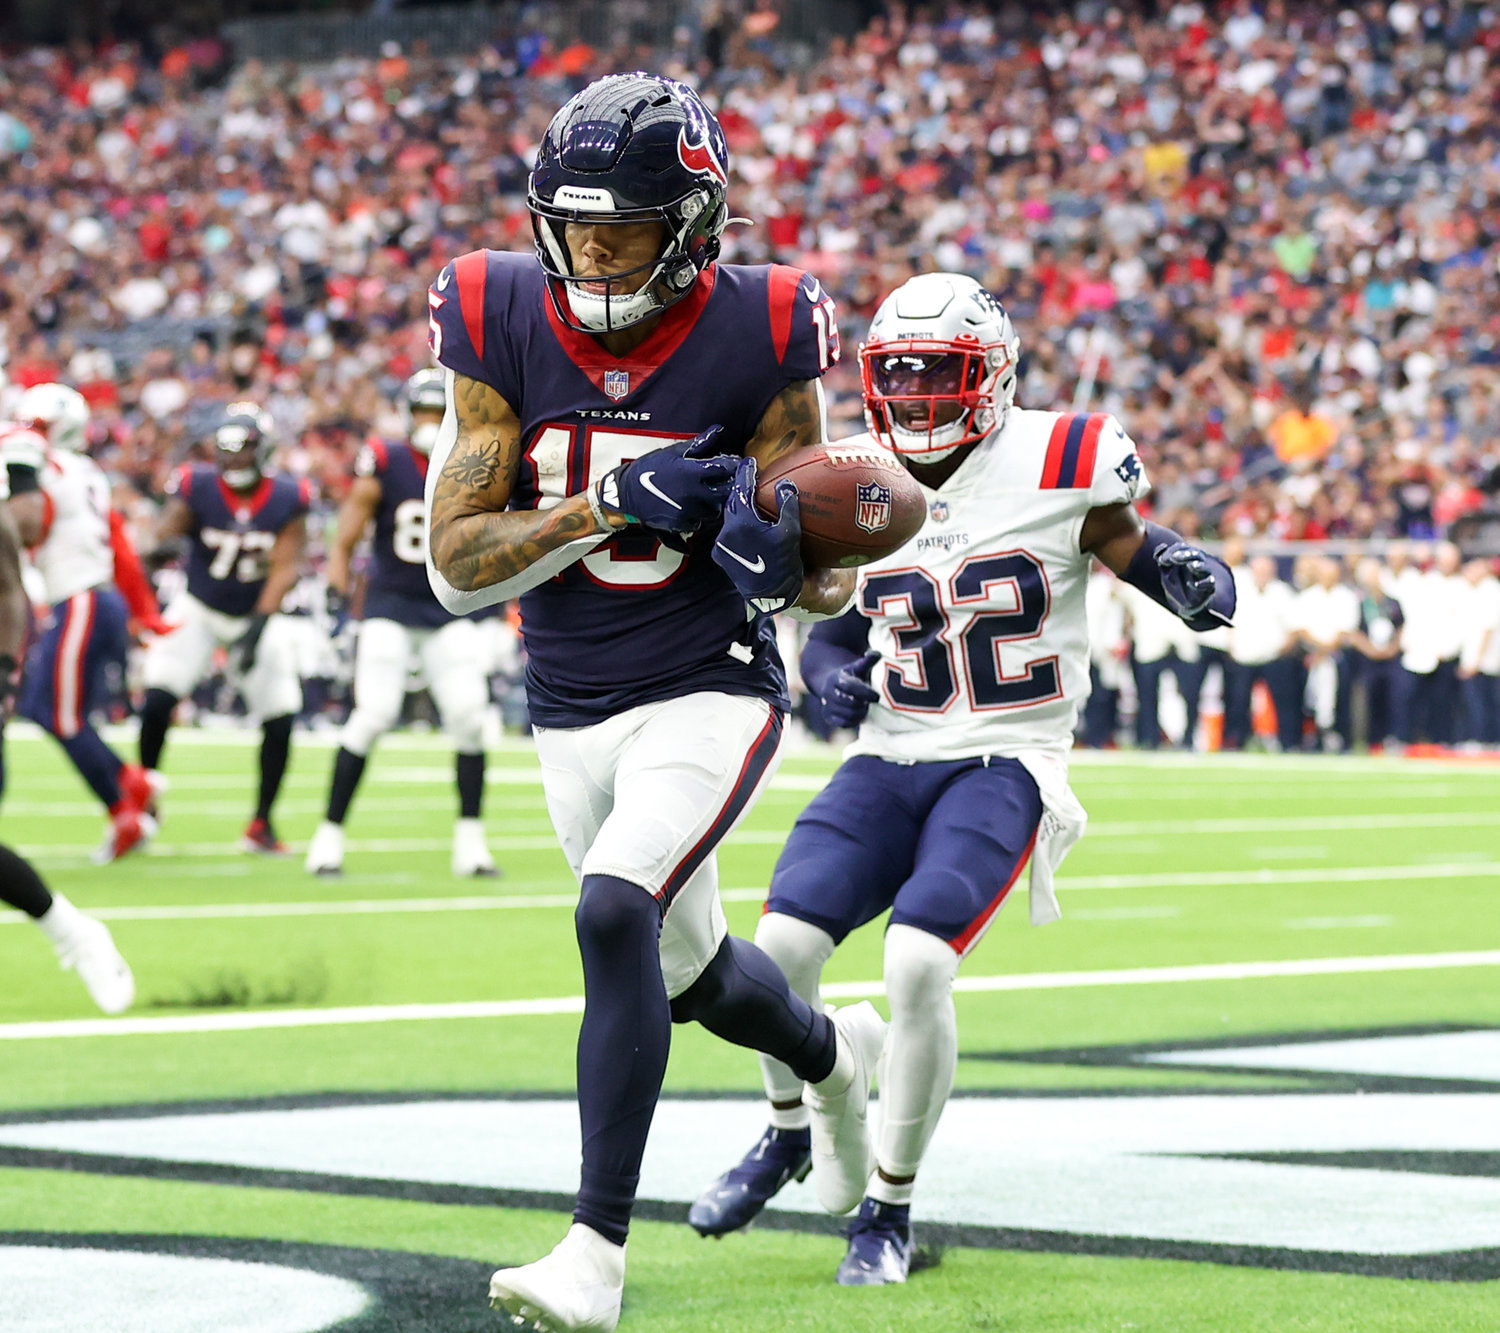 Houston Texans wide receiver Chris Moore (15) drops a would-be touchdown pass during an NFL game between Houston and New England on October 10, 2021 in Houston, Texas. The Patriots won 25-22.